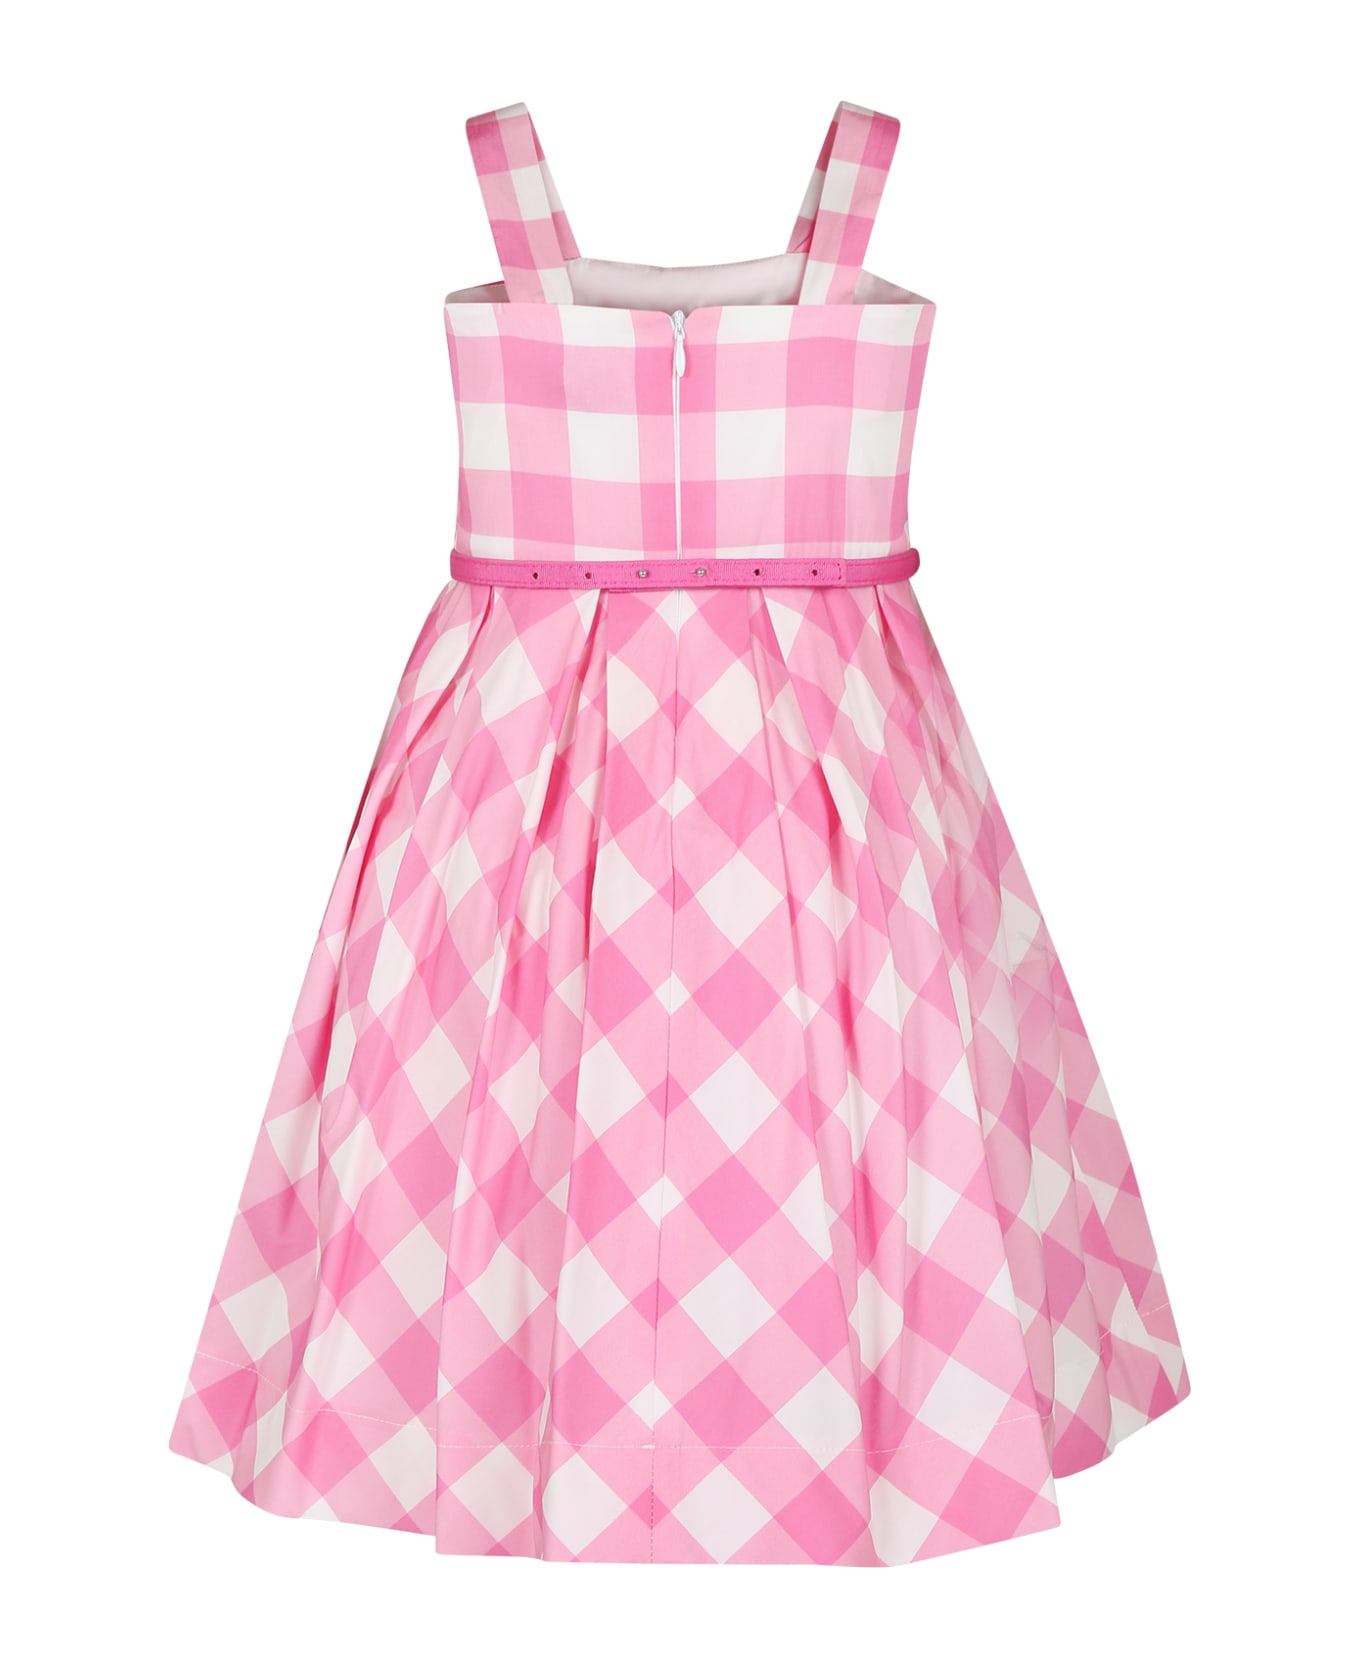 Monnalisa Pink Dress For Girl With Bow And Vichy Print - Multicolor ワンピース＆ドレス